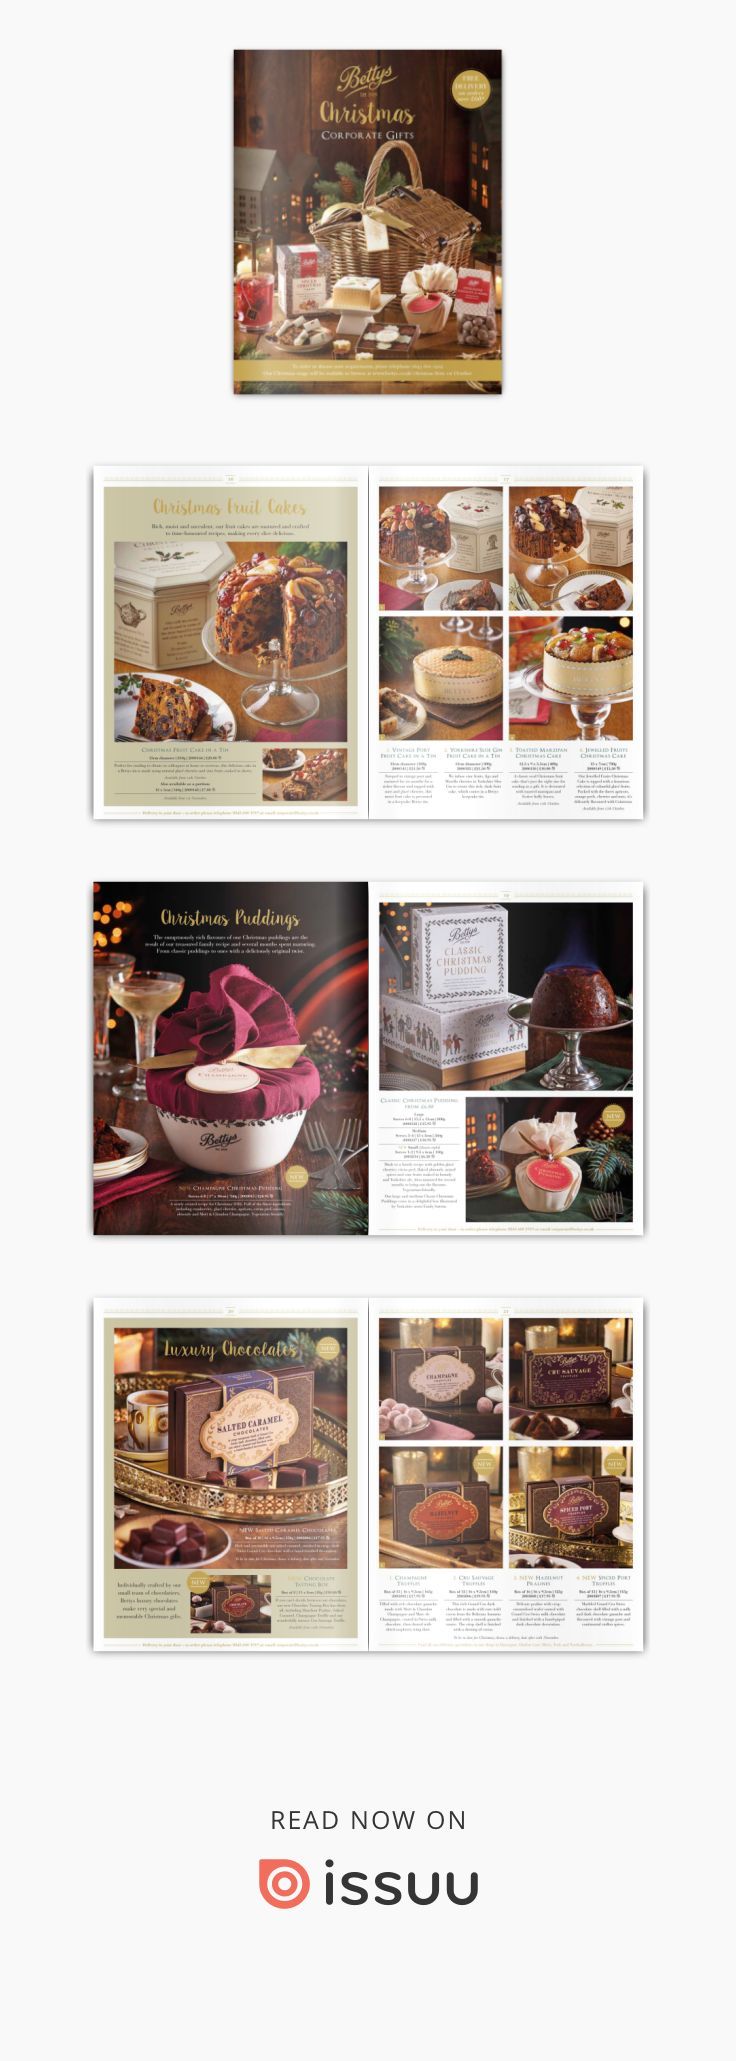 Bettys Corporate - Christmas Catalogue 2016  Bettys Corporate Gifts